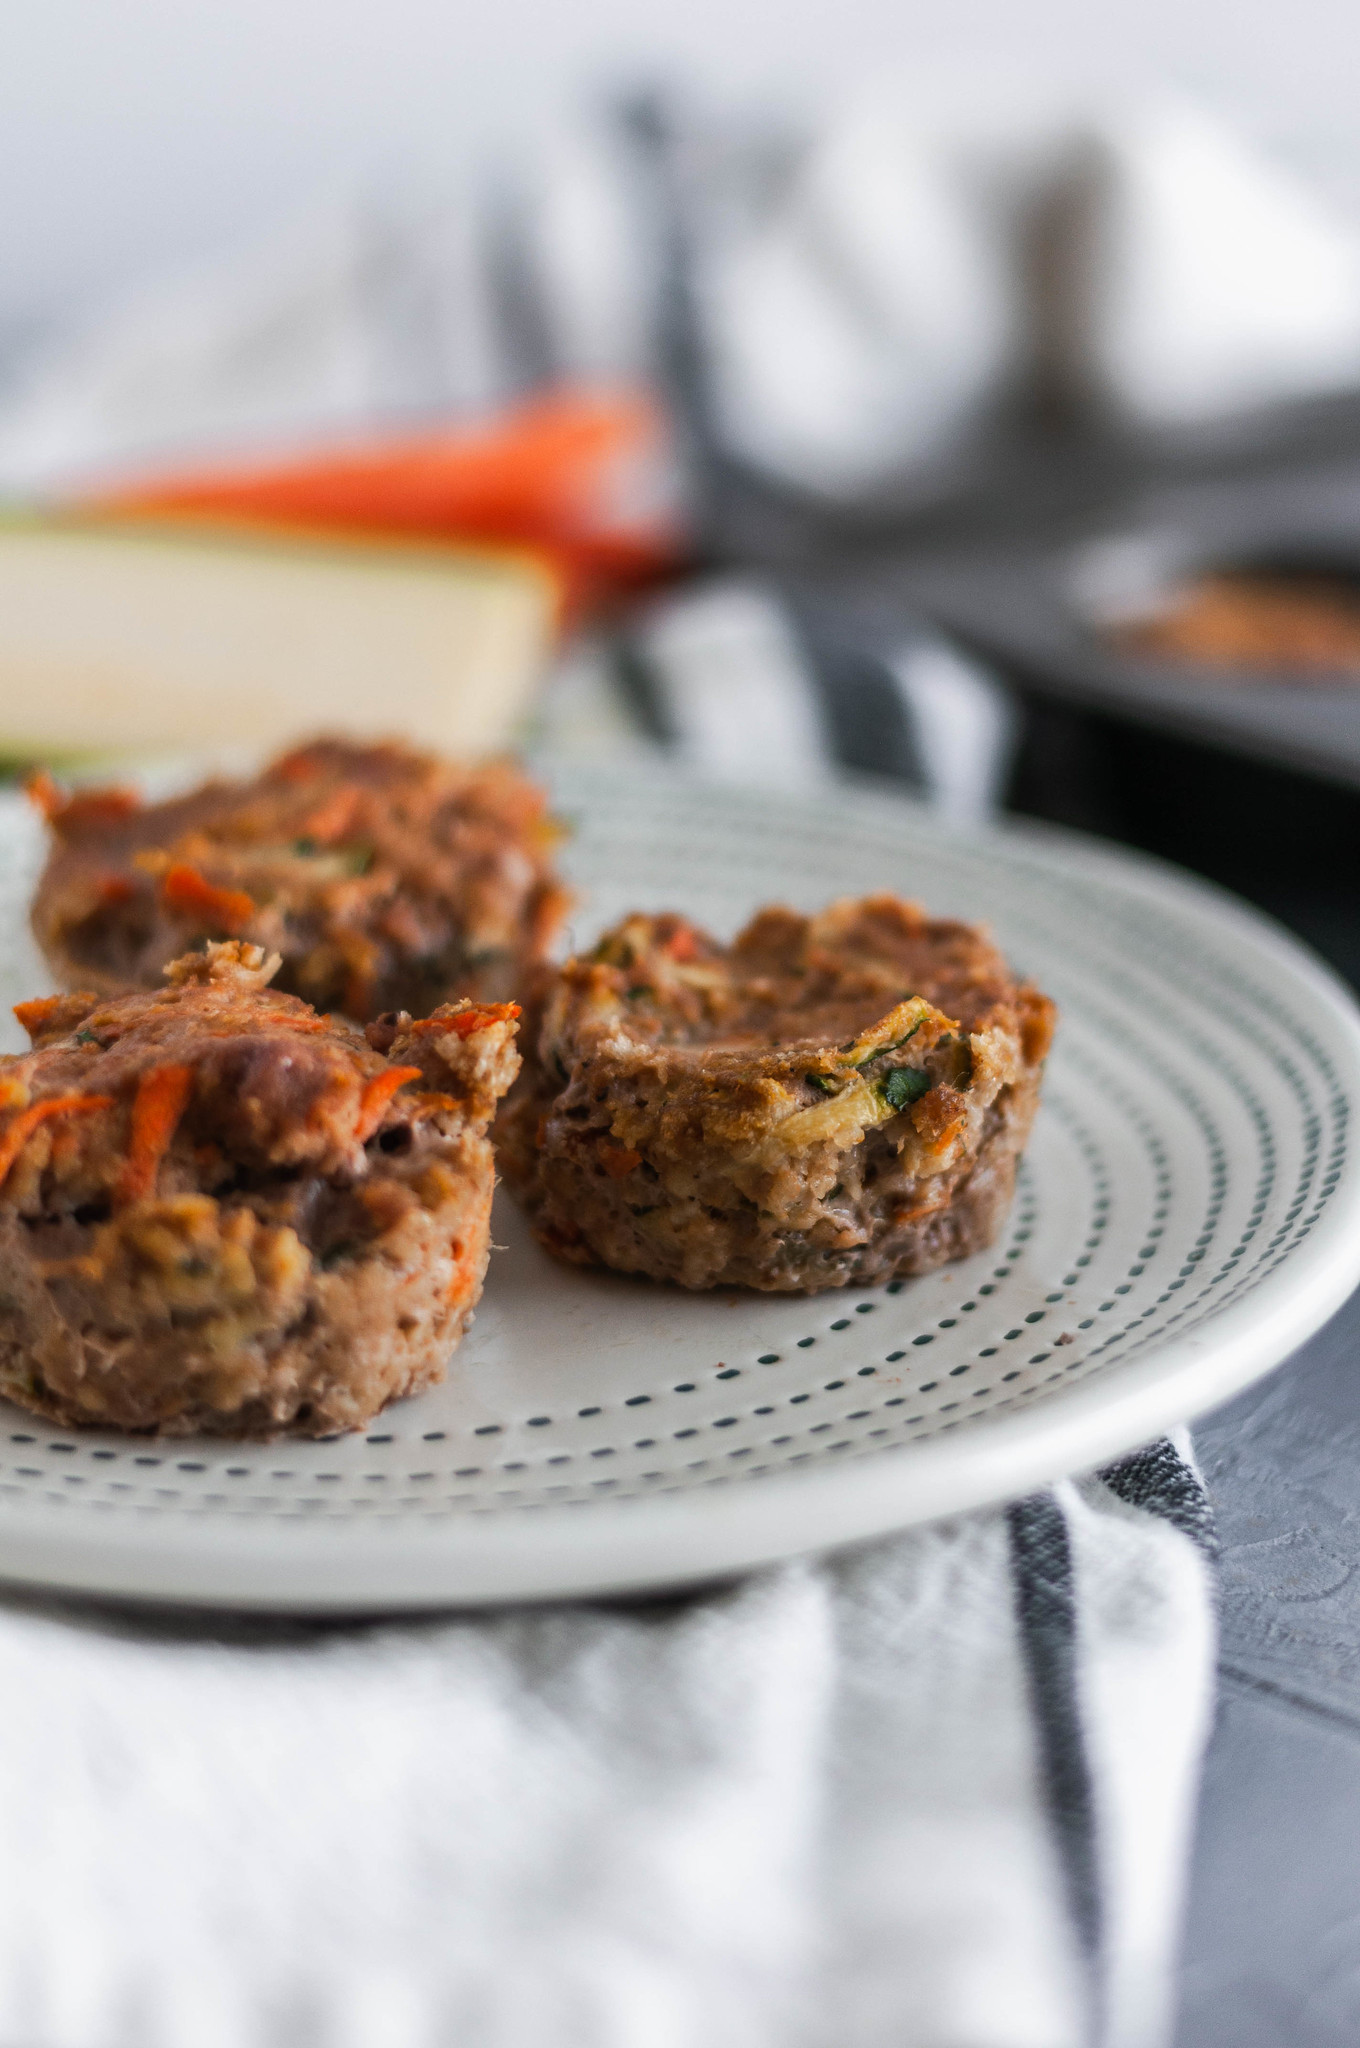 If you're looking for a healthy weeknight meal, these Mini Turkey Meatloaf Cups are packed with lean turkey and lots of vegetables. Top with ketchup, barbecue sauce or honey mustard.